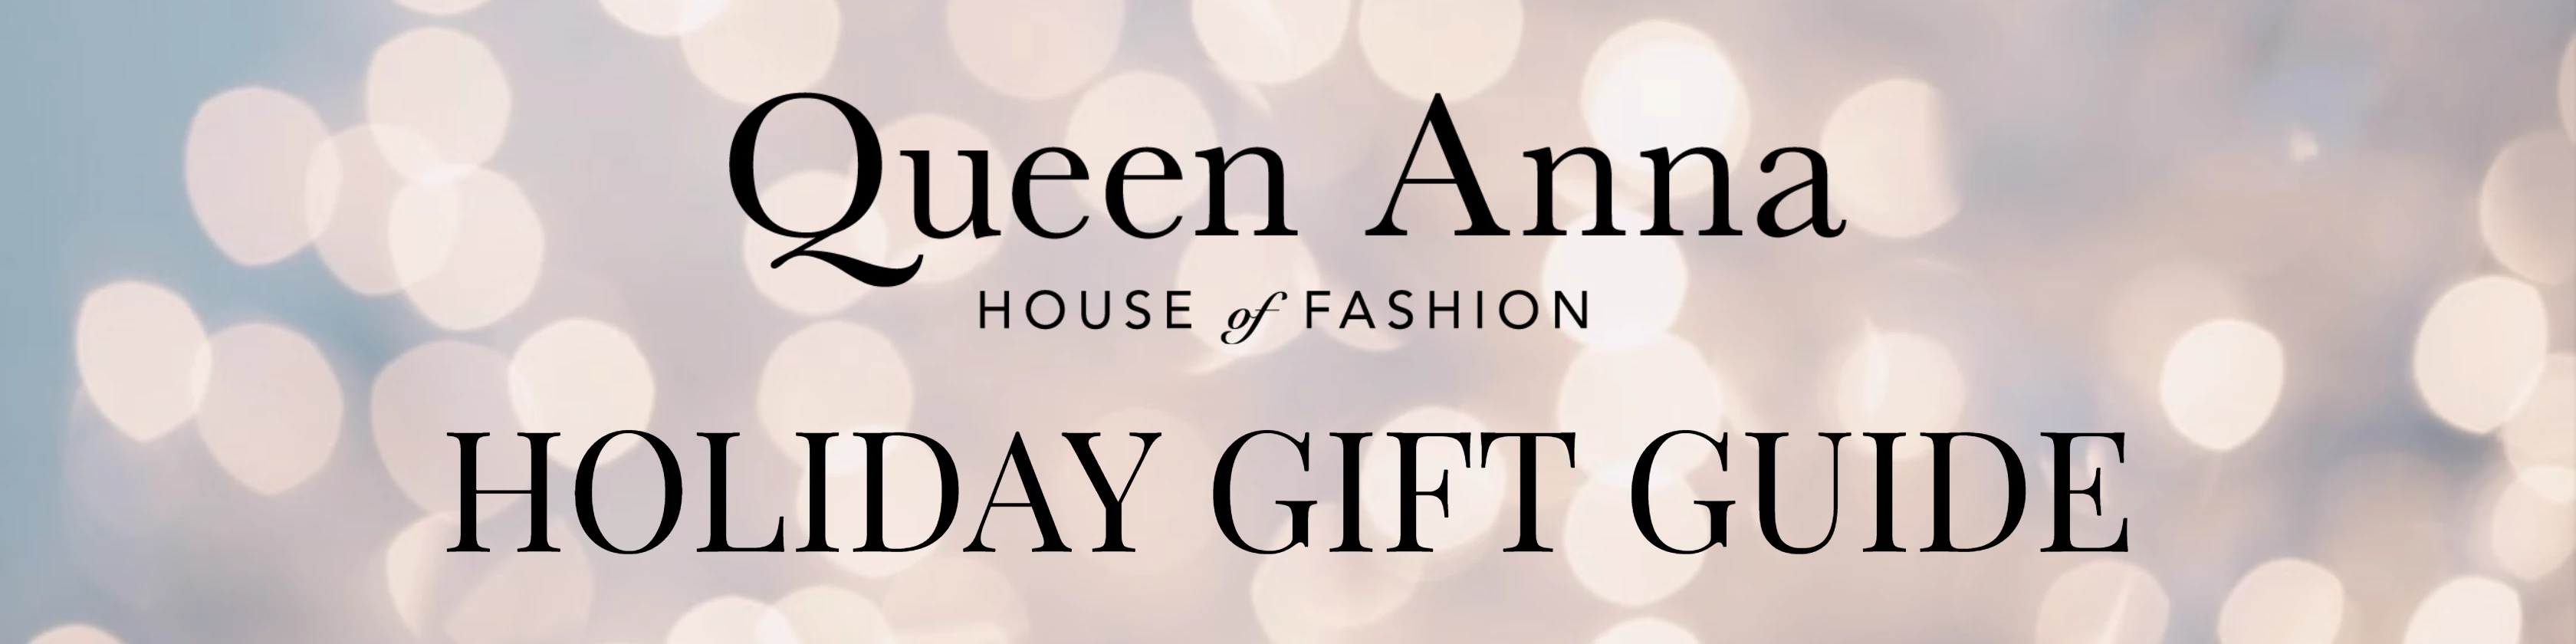 queen anna holiday gift guide